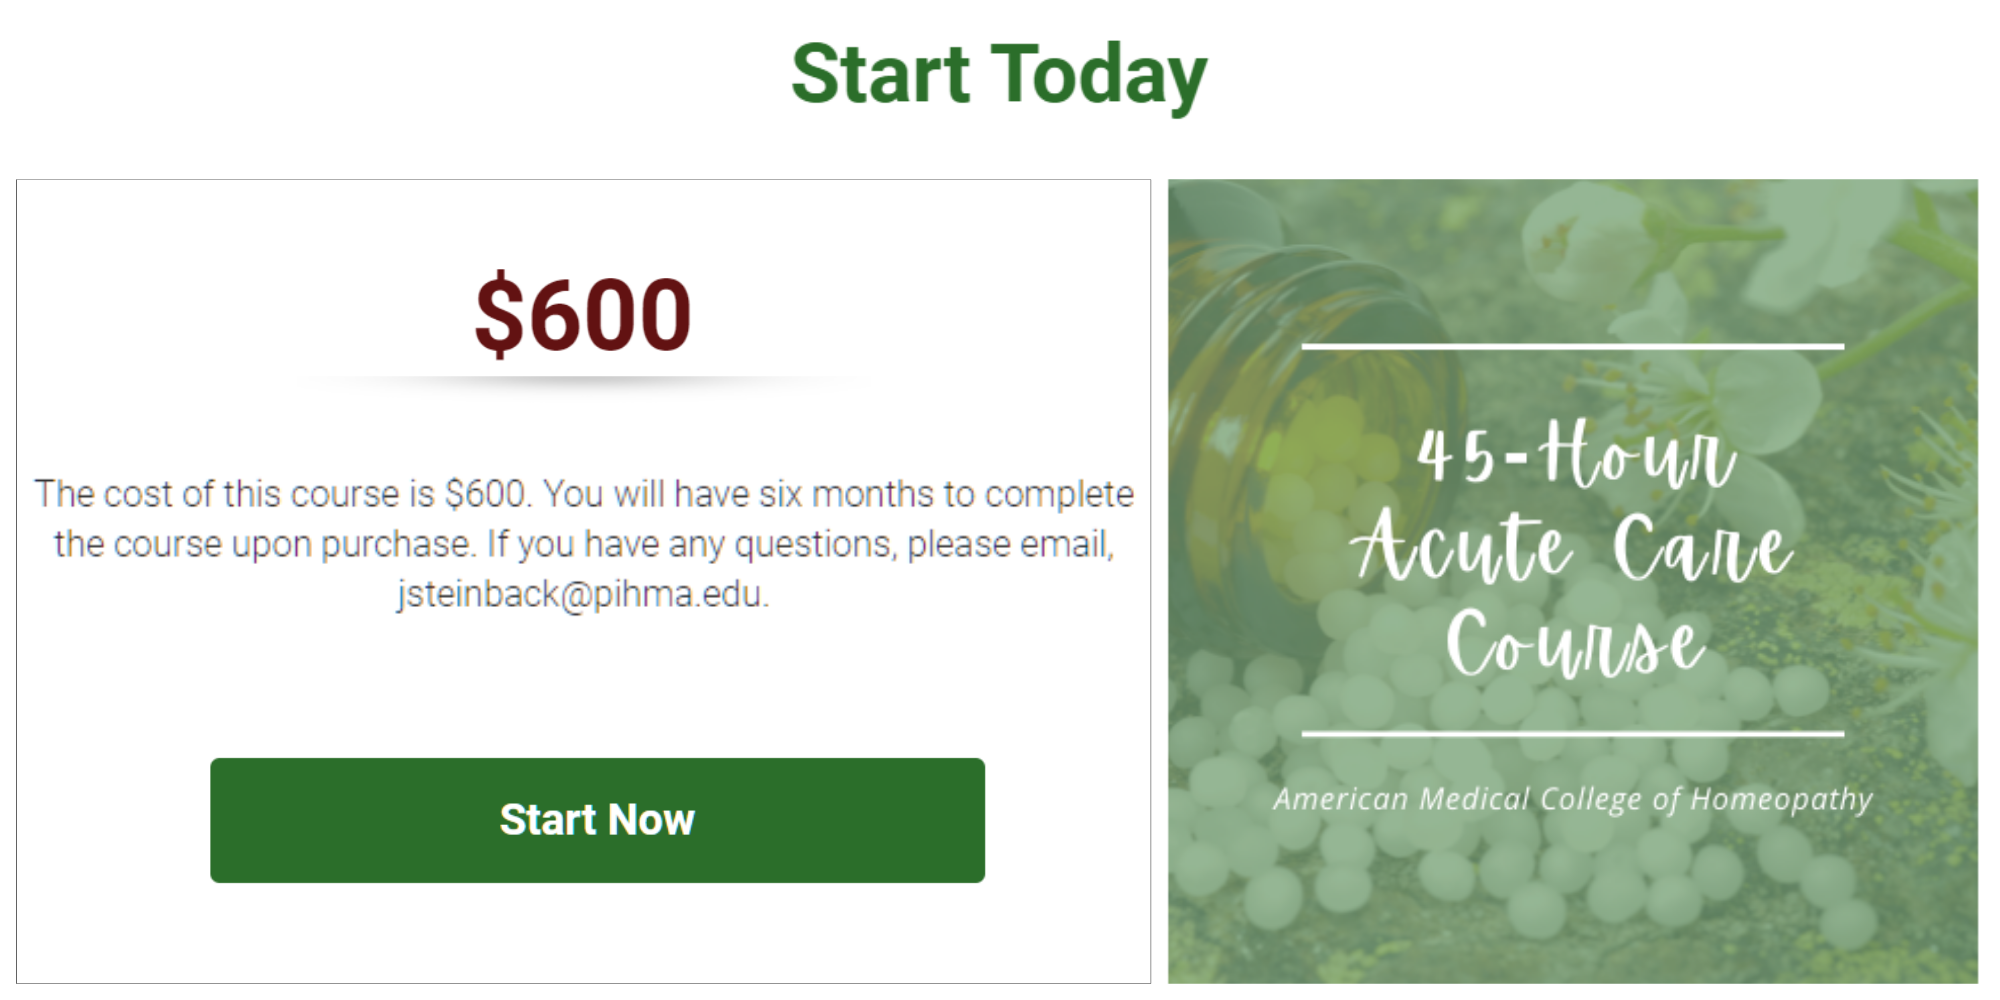 Start Now: $600 fee and six months to complete the course.